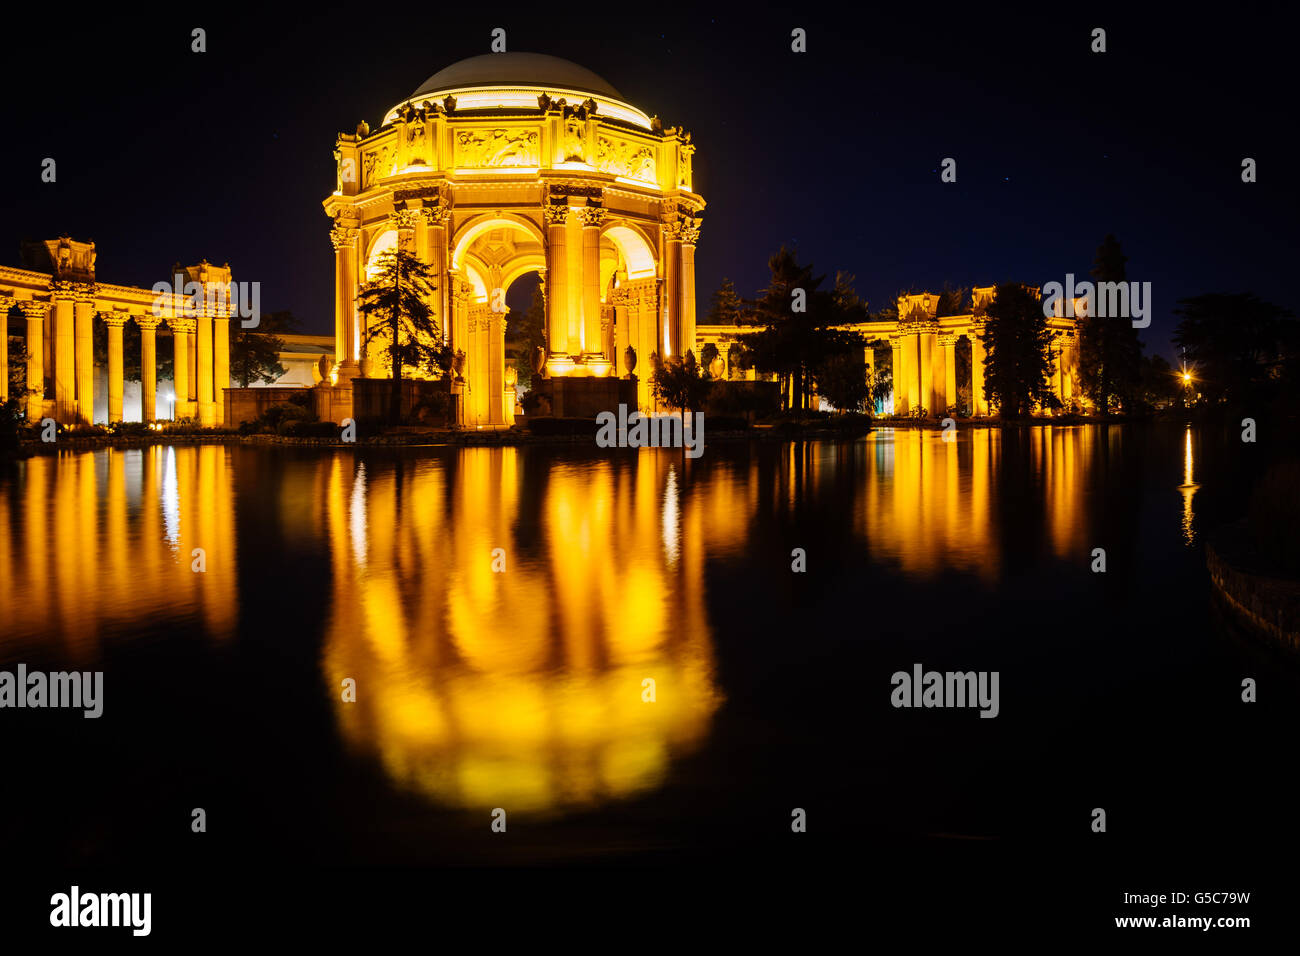 The Palace of Fine Arts at night, in San Francisco, California. Stock Photo